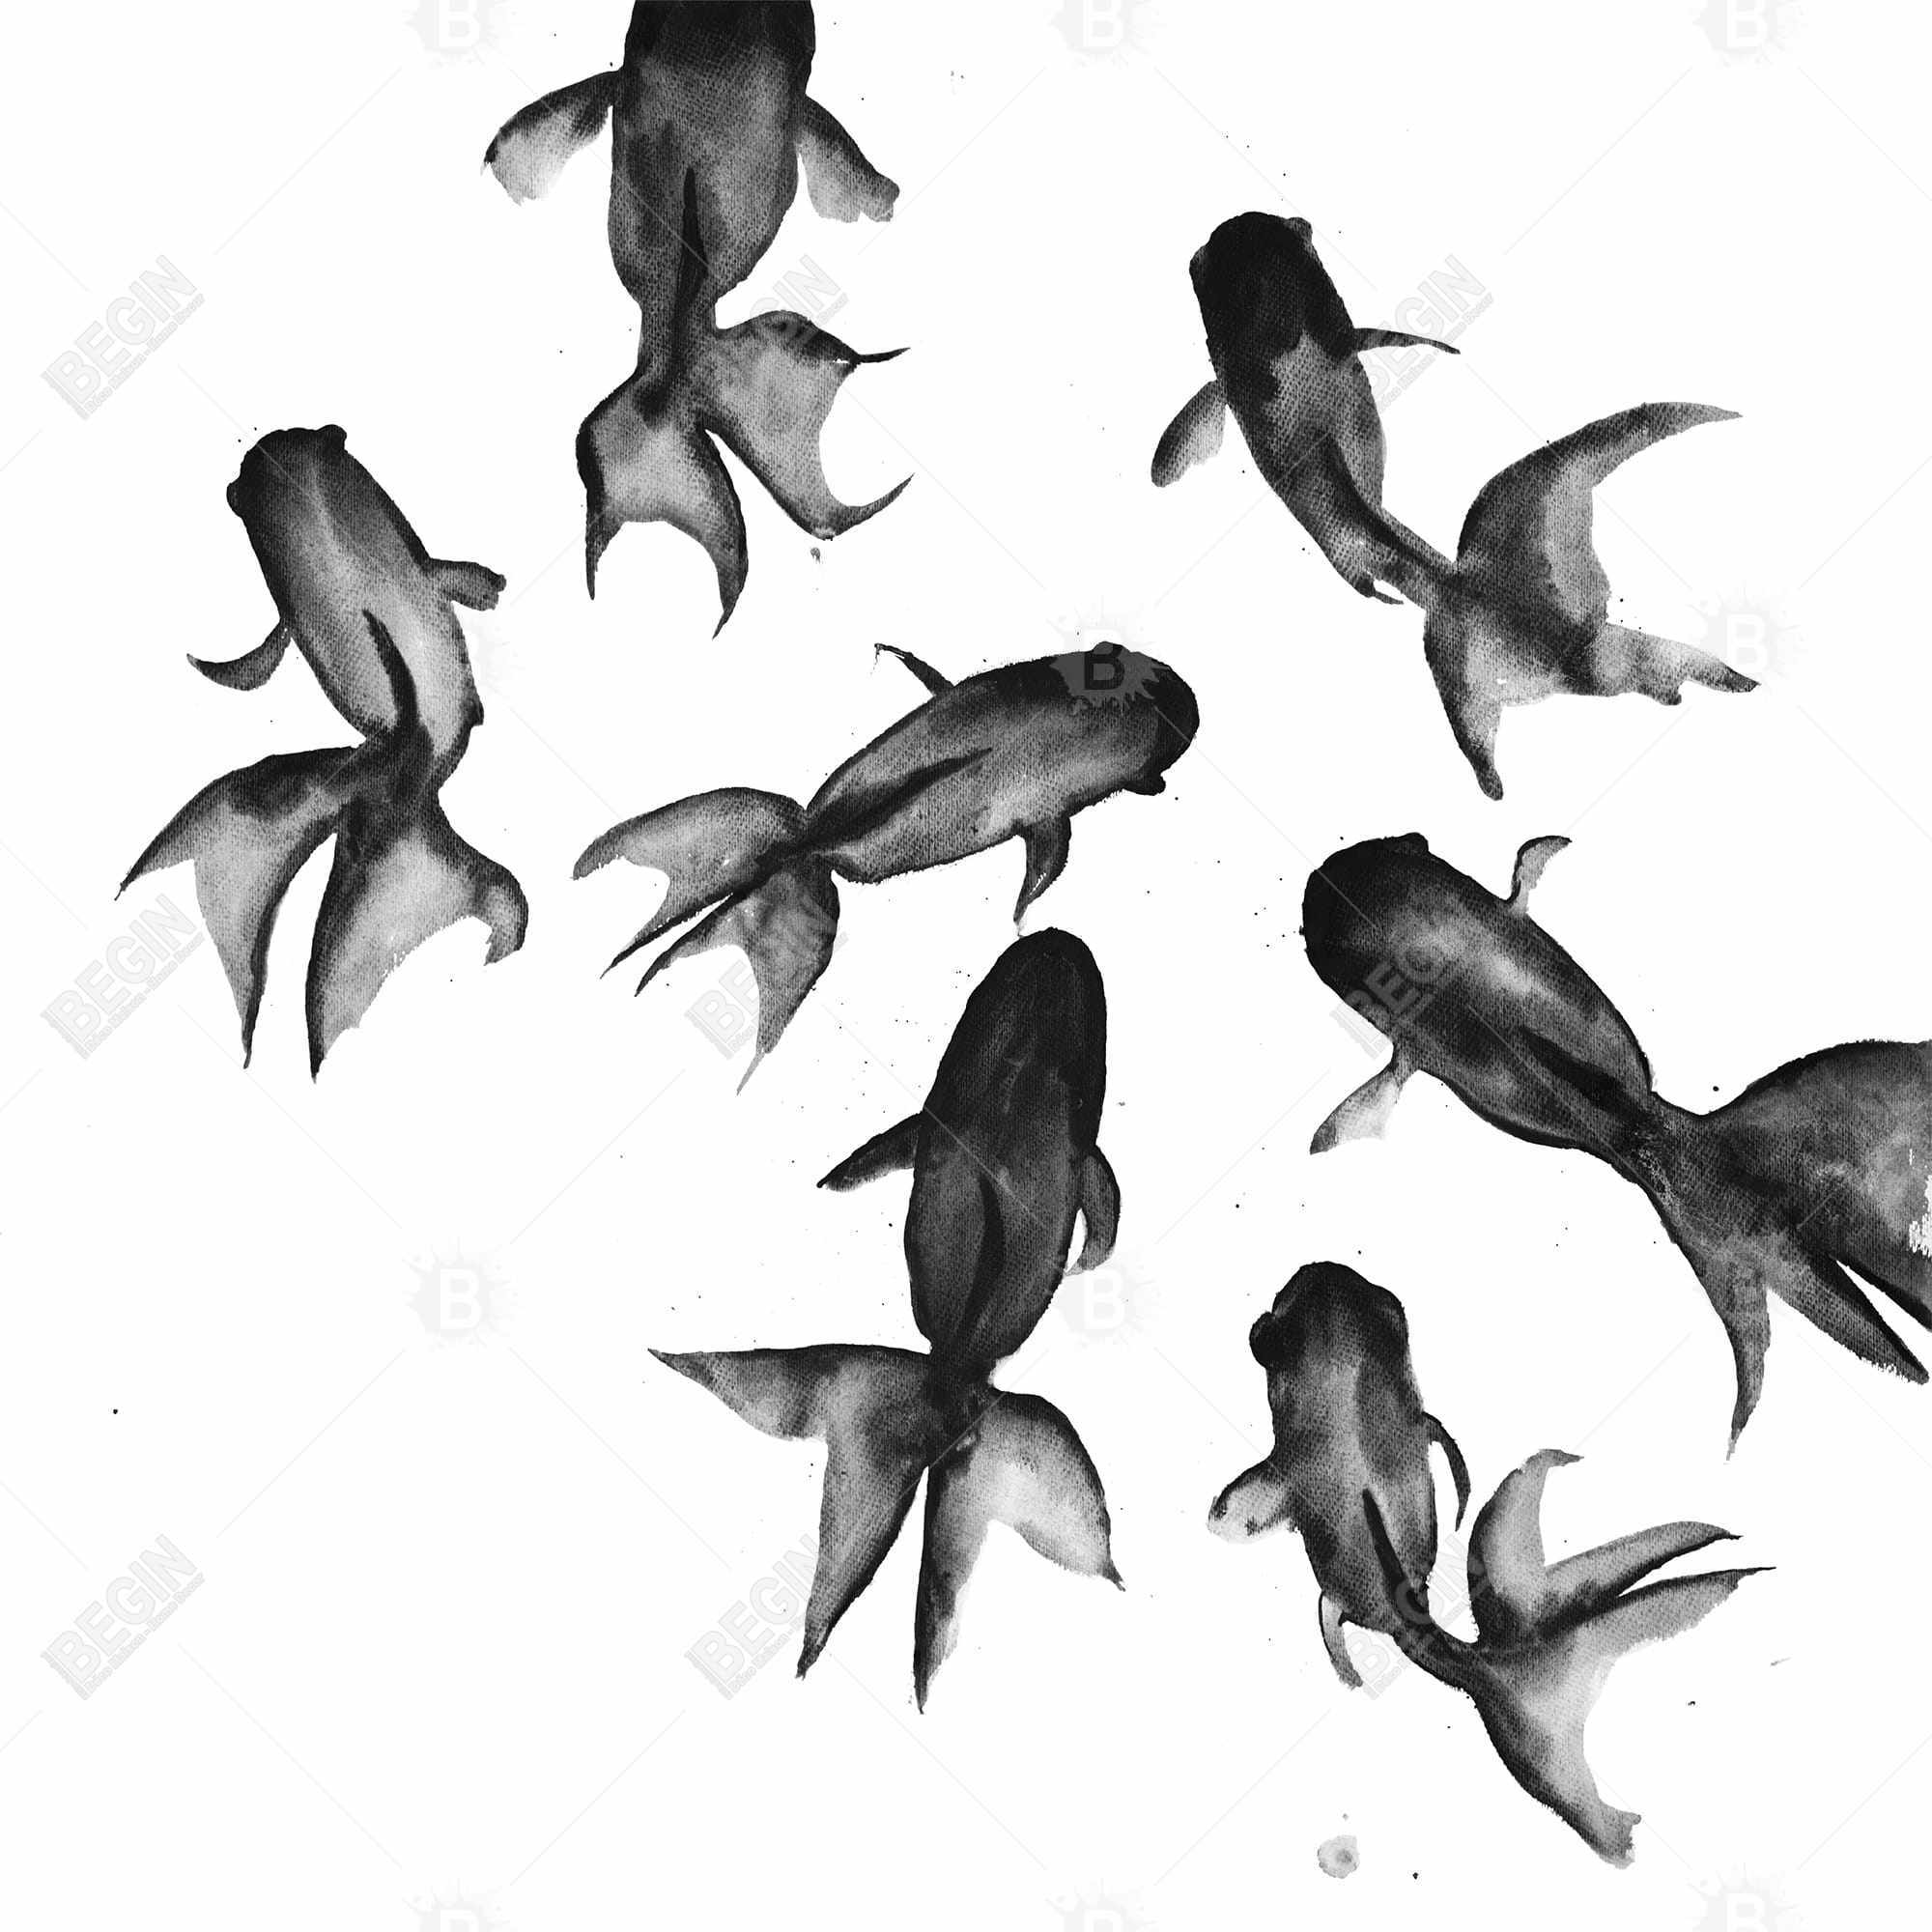 Small black fishes